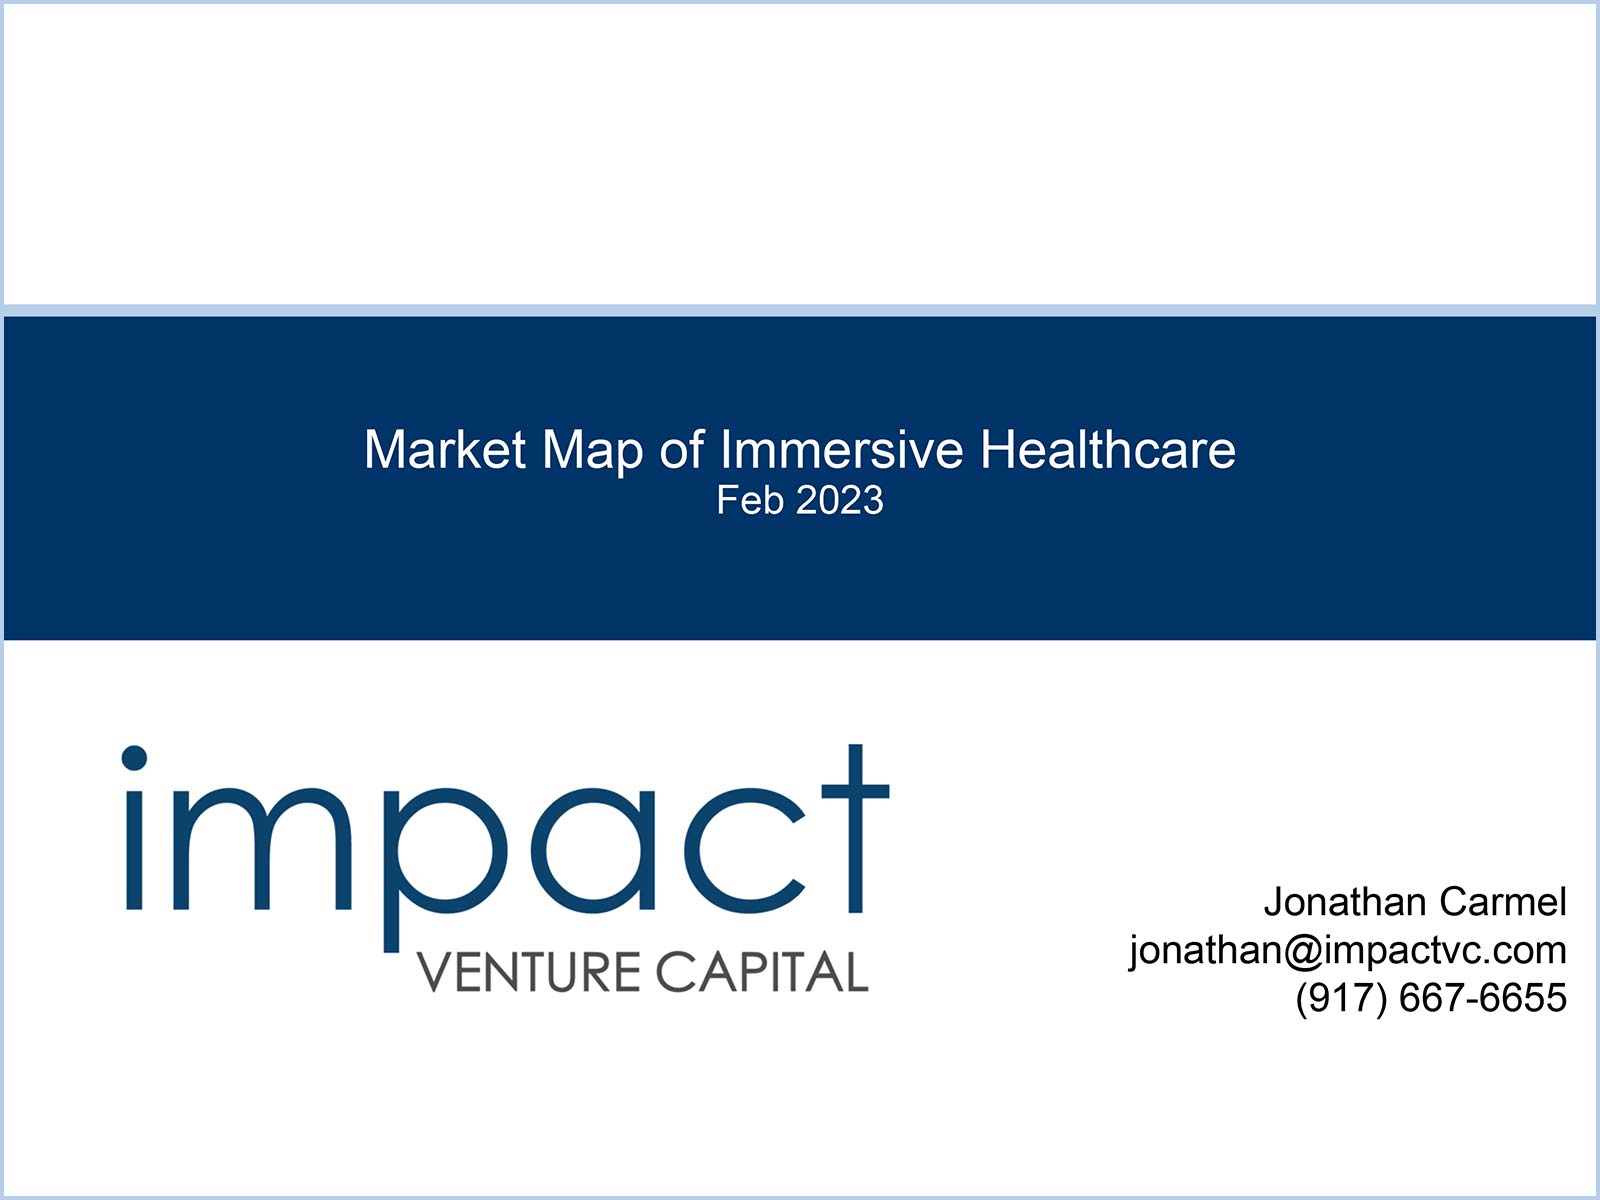 Preview image of Market Map of Immersive Healthcare